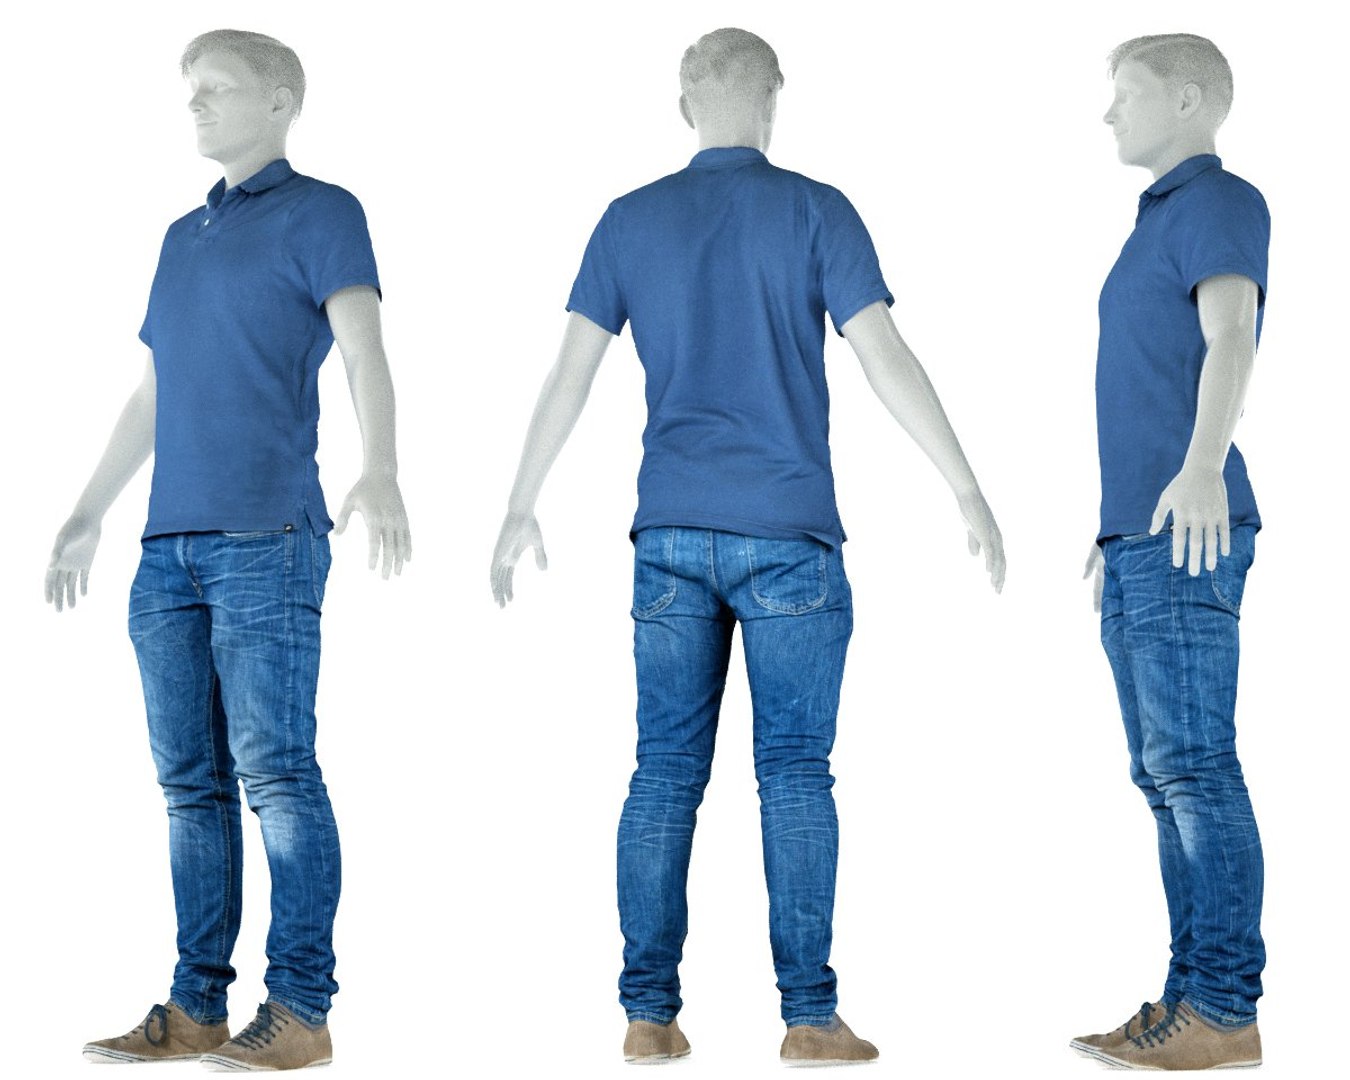 3D Model Male Clothing Outfit - TurboSquid 1329858